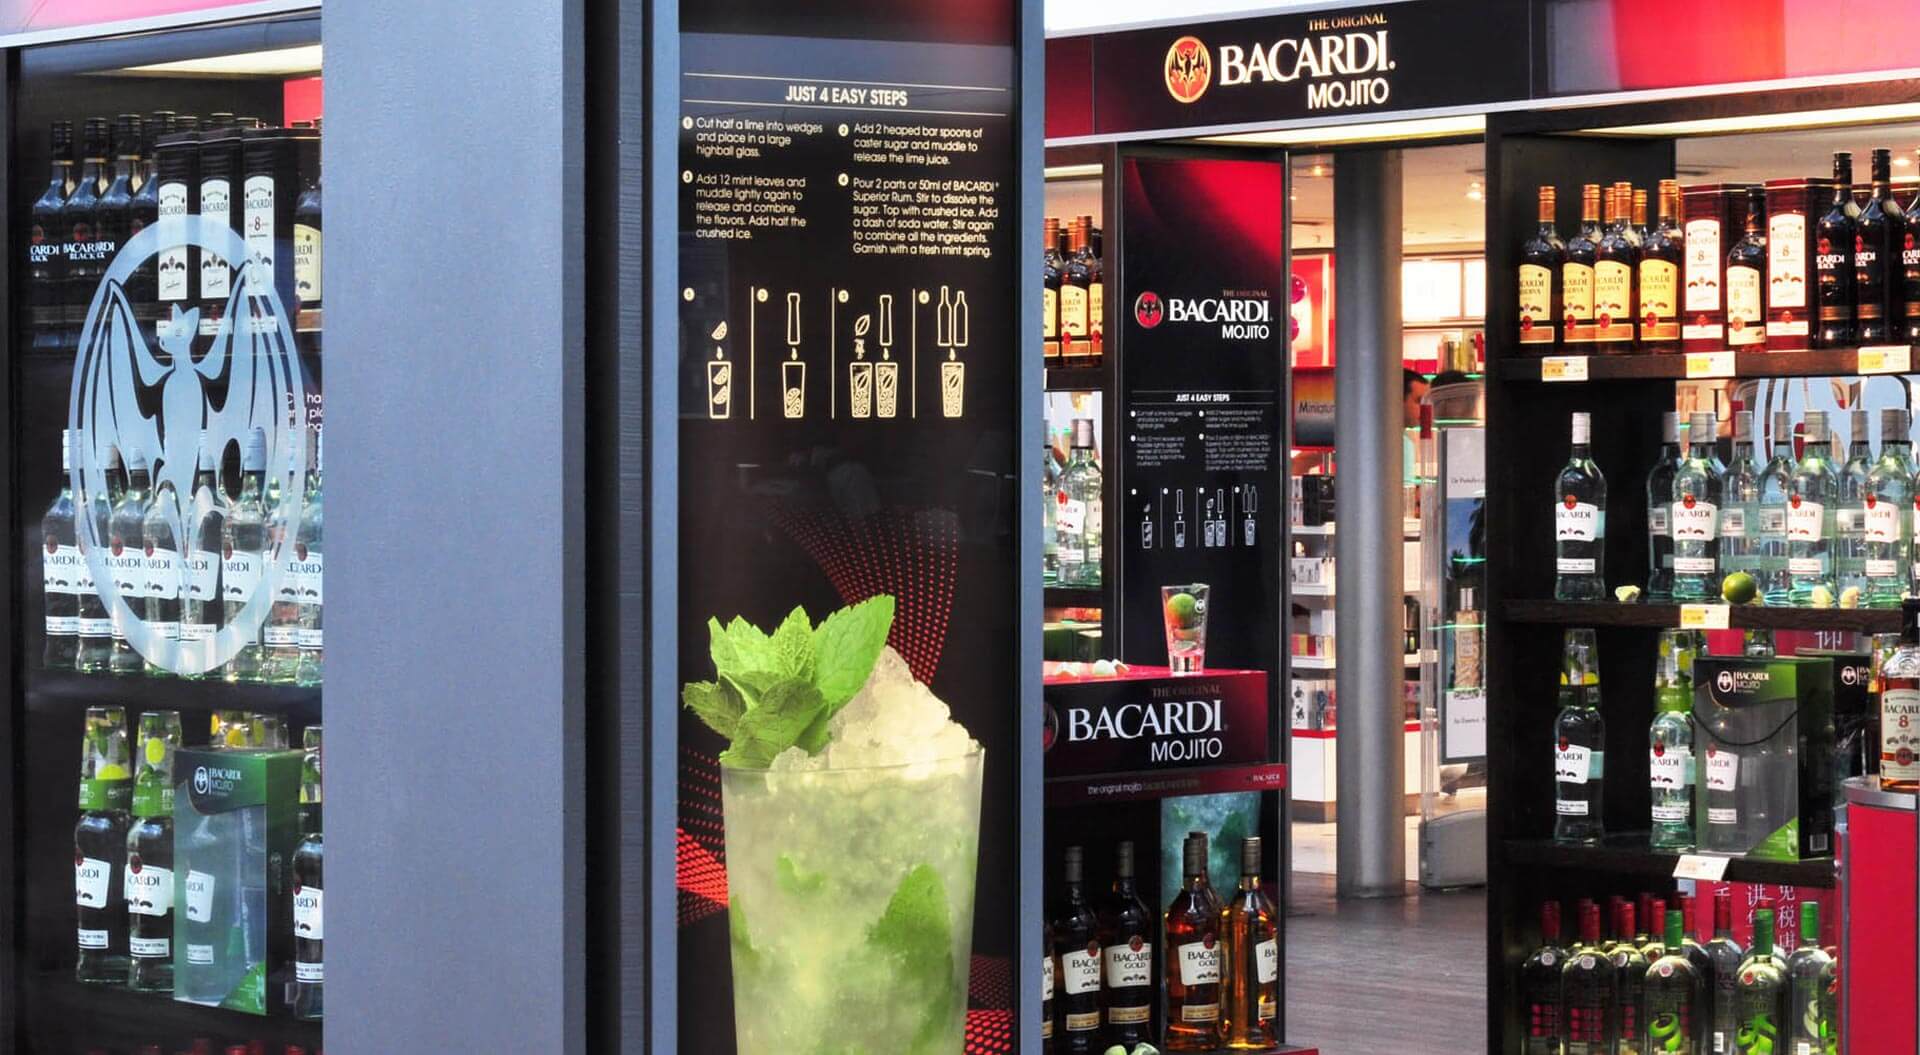 Bacardi Mojito Global Travel Retail, brand activation store design at Charles de Gualle Airport